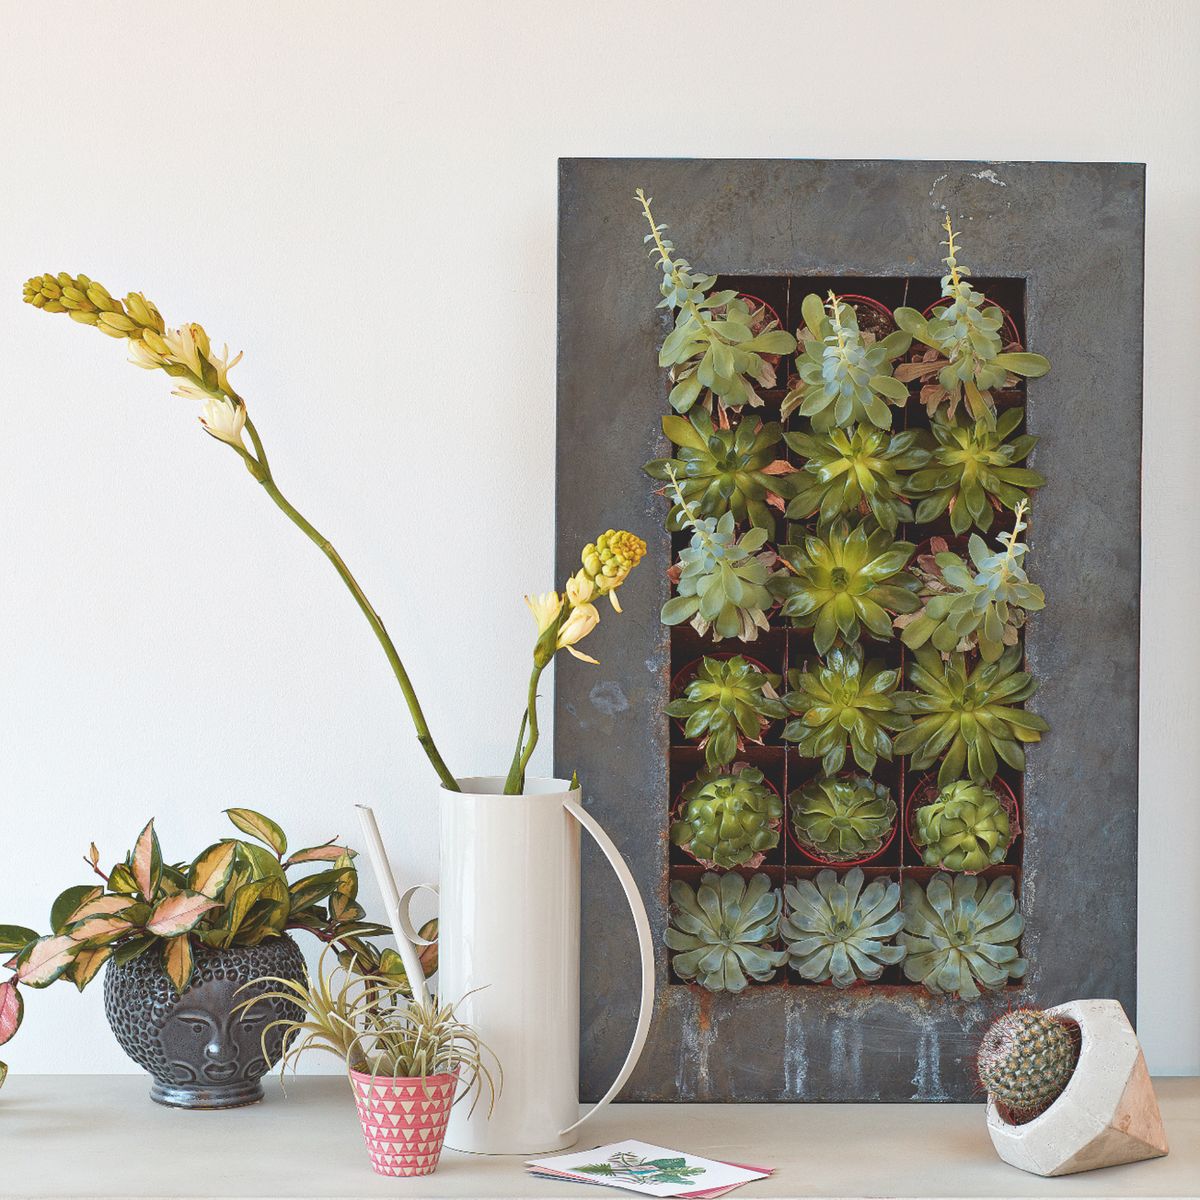 Living room houseplant ideas to elevate your space